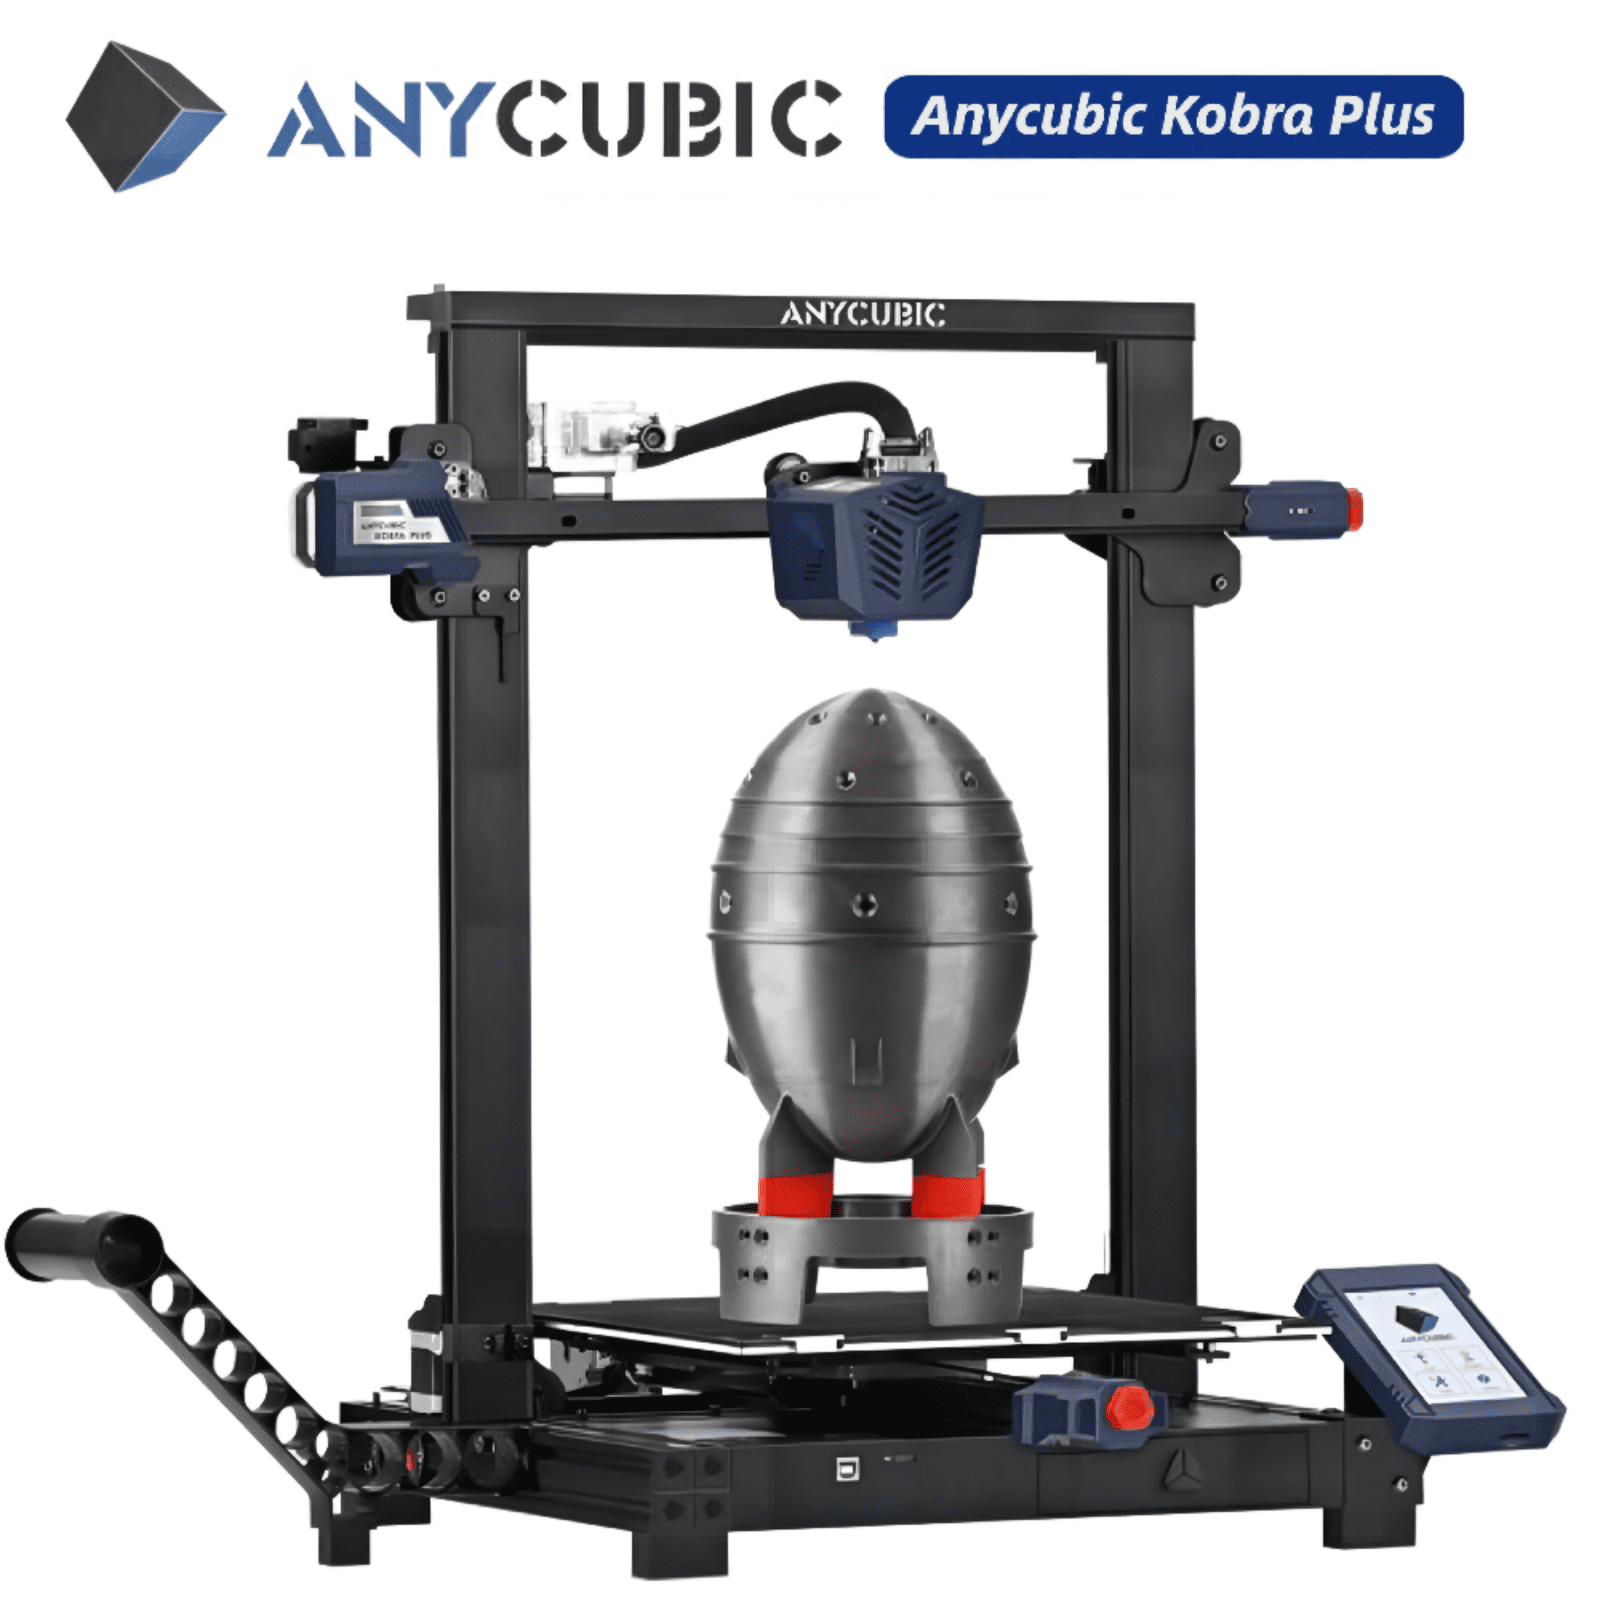 Anycubic Printer Plus Auto Leveling, Large 3D Printer with Smart 25-Point Leveling, Large Build Volume 13.8x11.8x11.8inch - Walmart.com